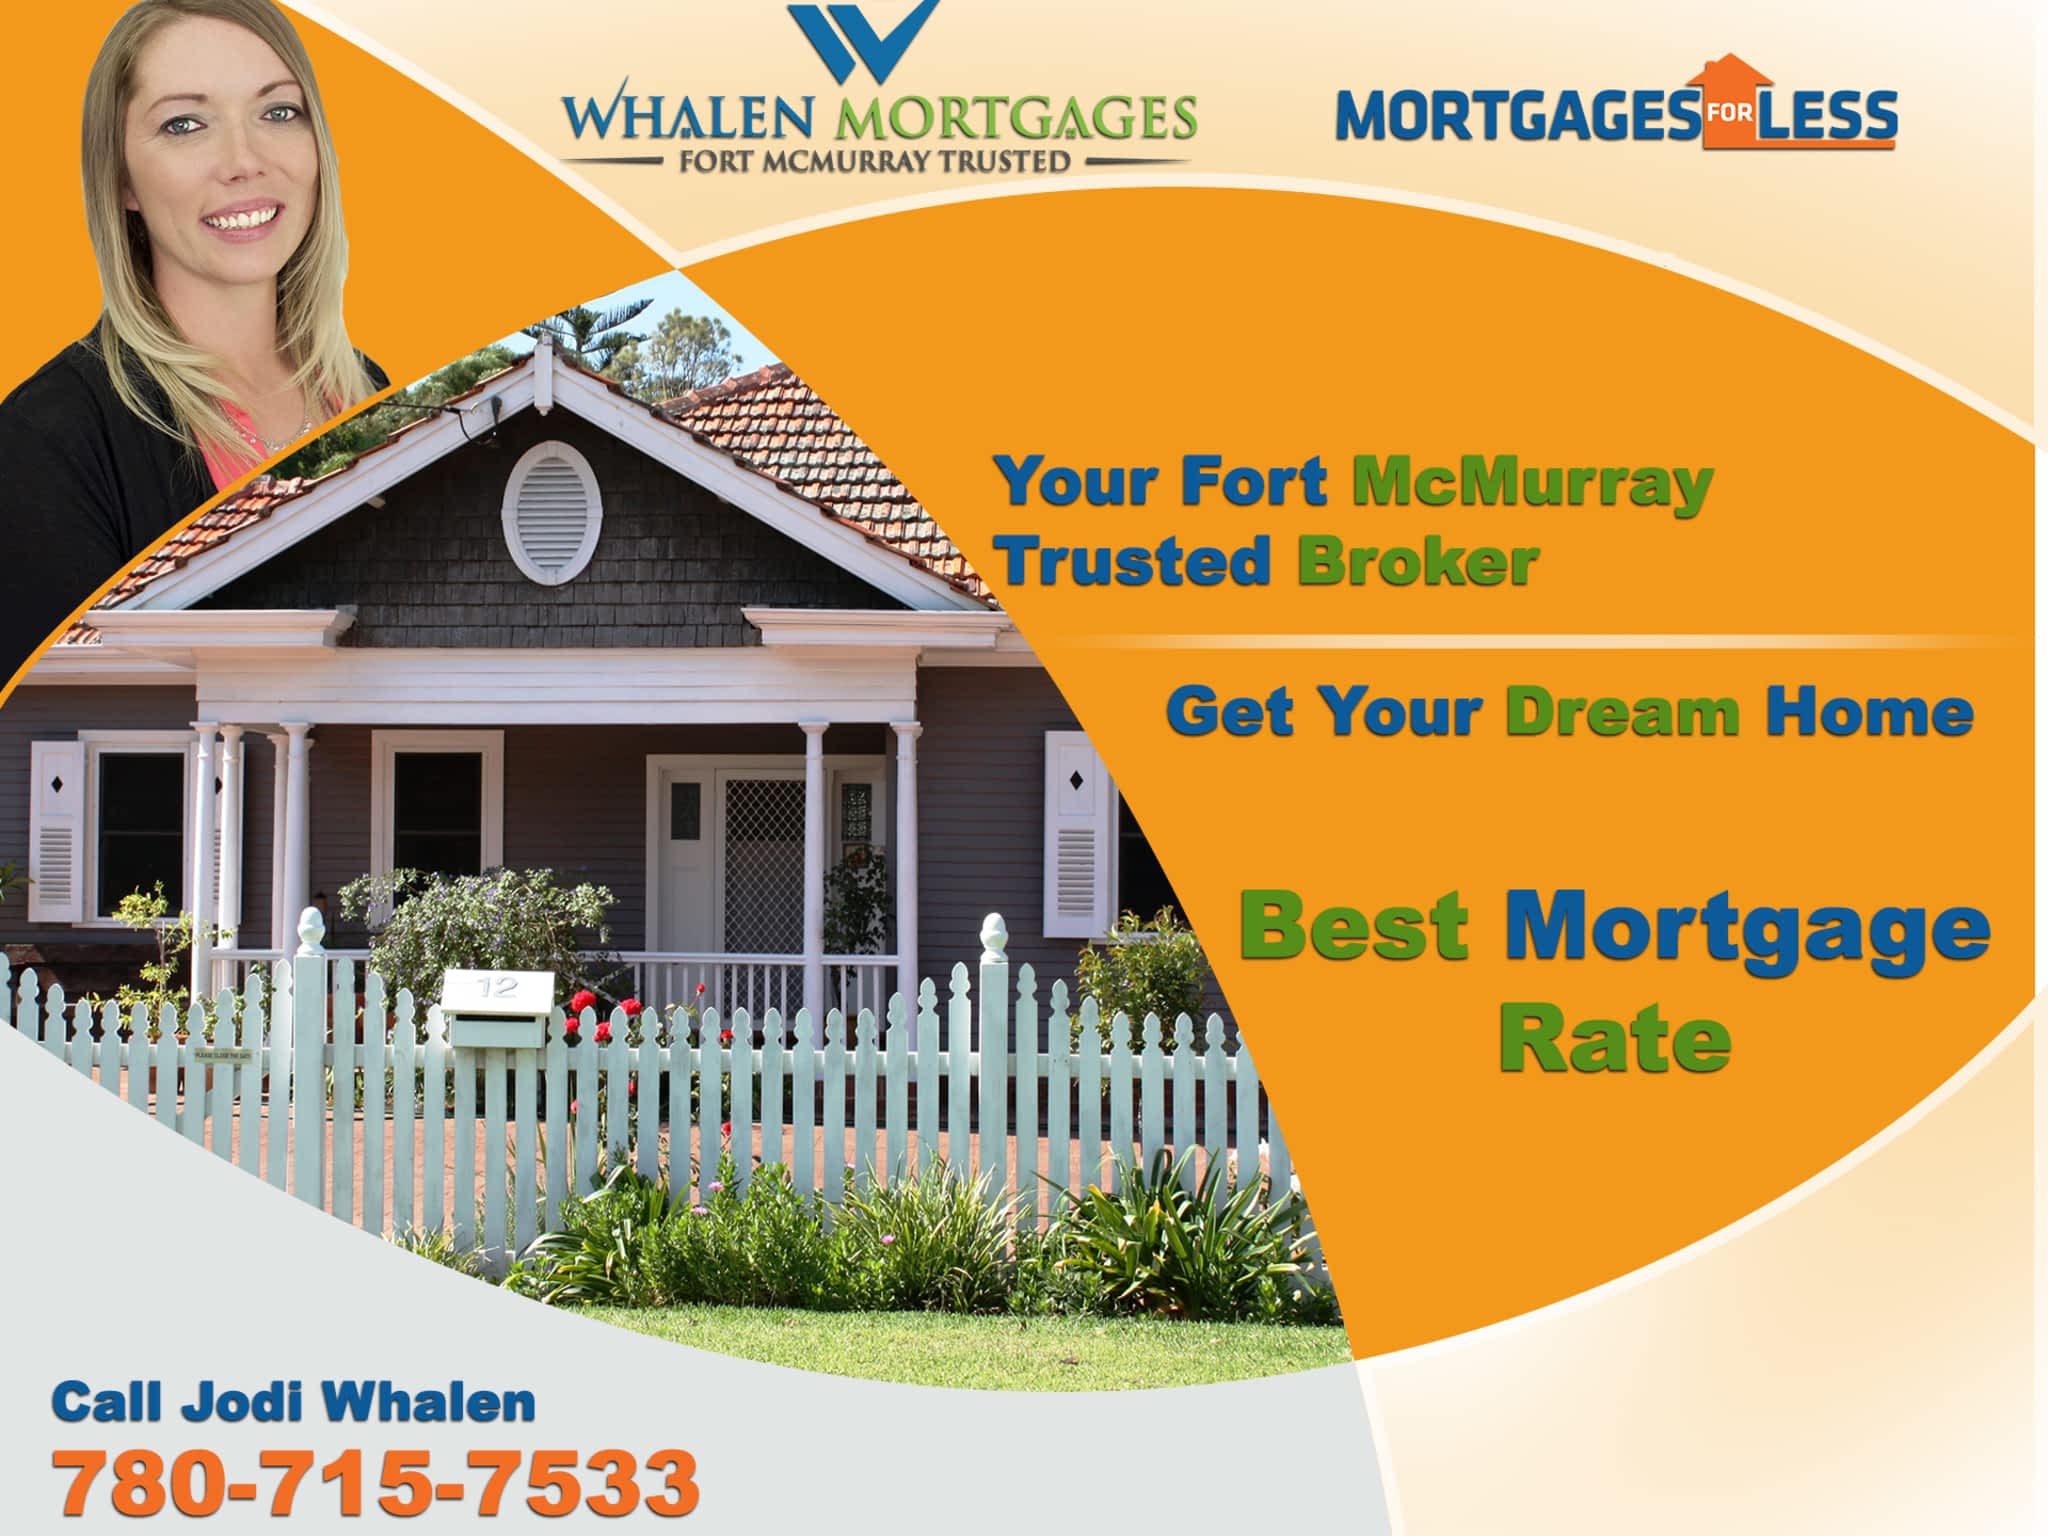 photo Whalen Mortgages - Fort McMurray Mortgage Broker